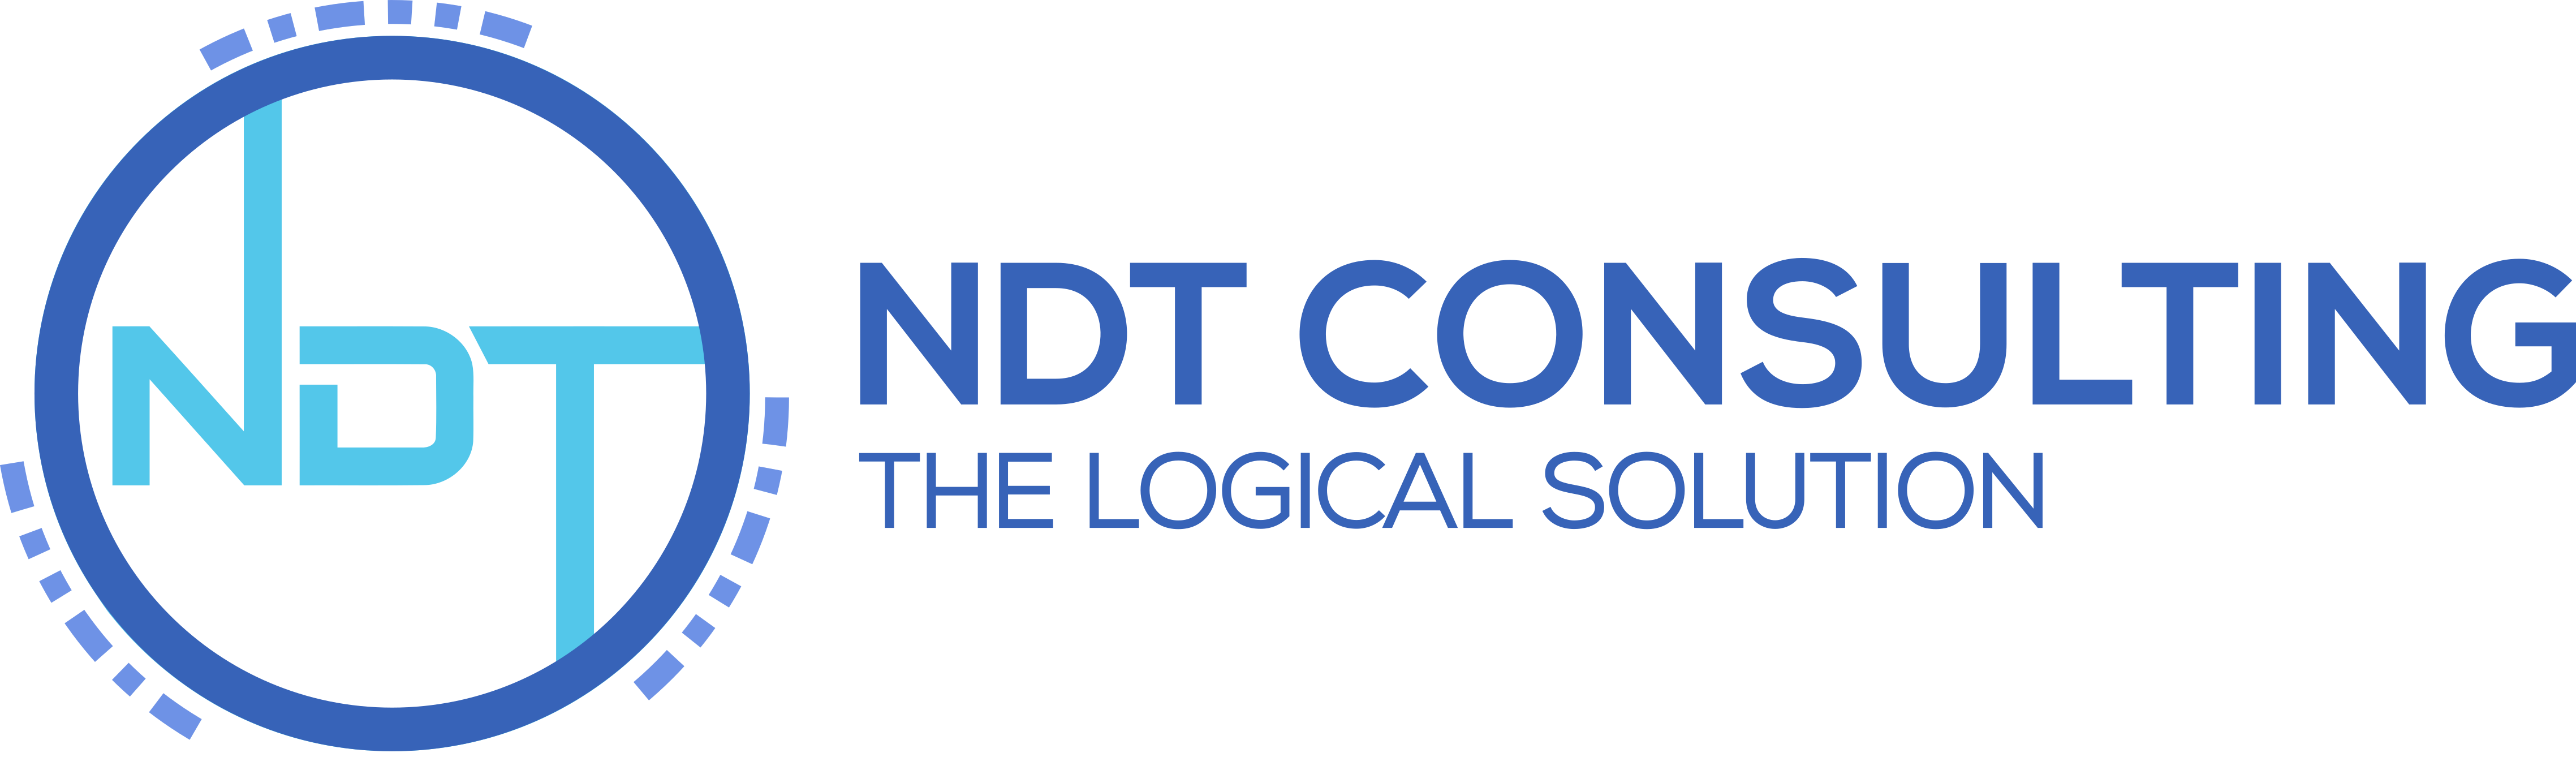 NDT Consulting